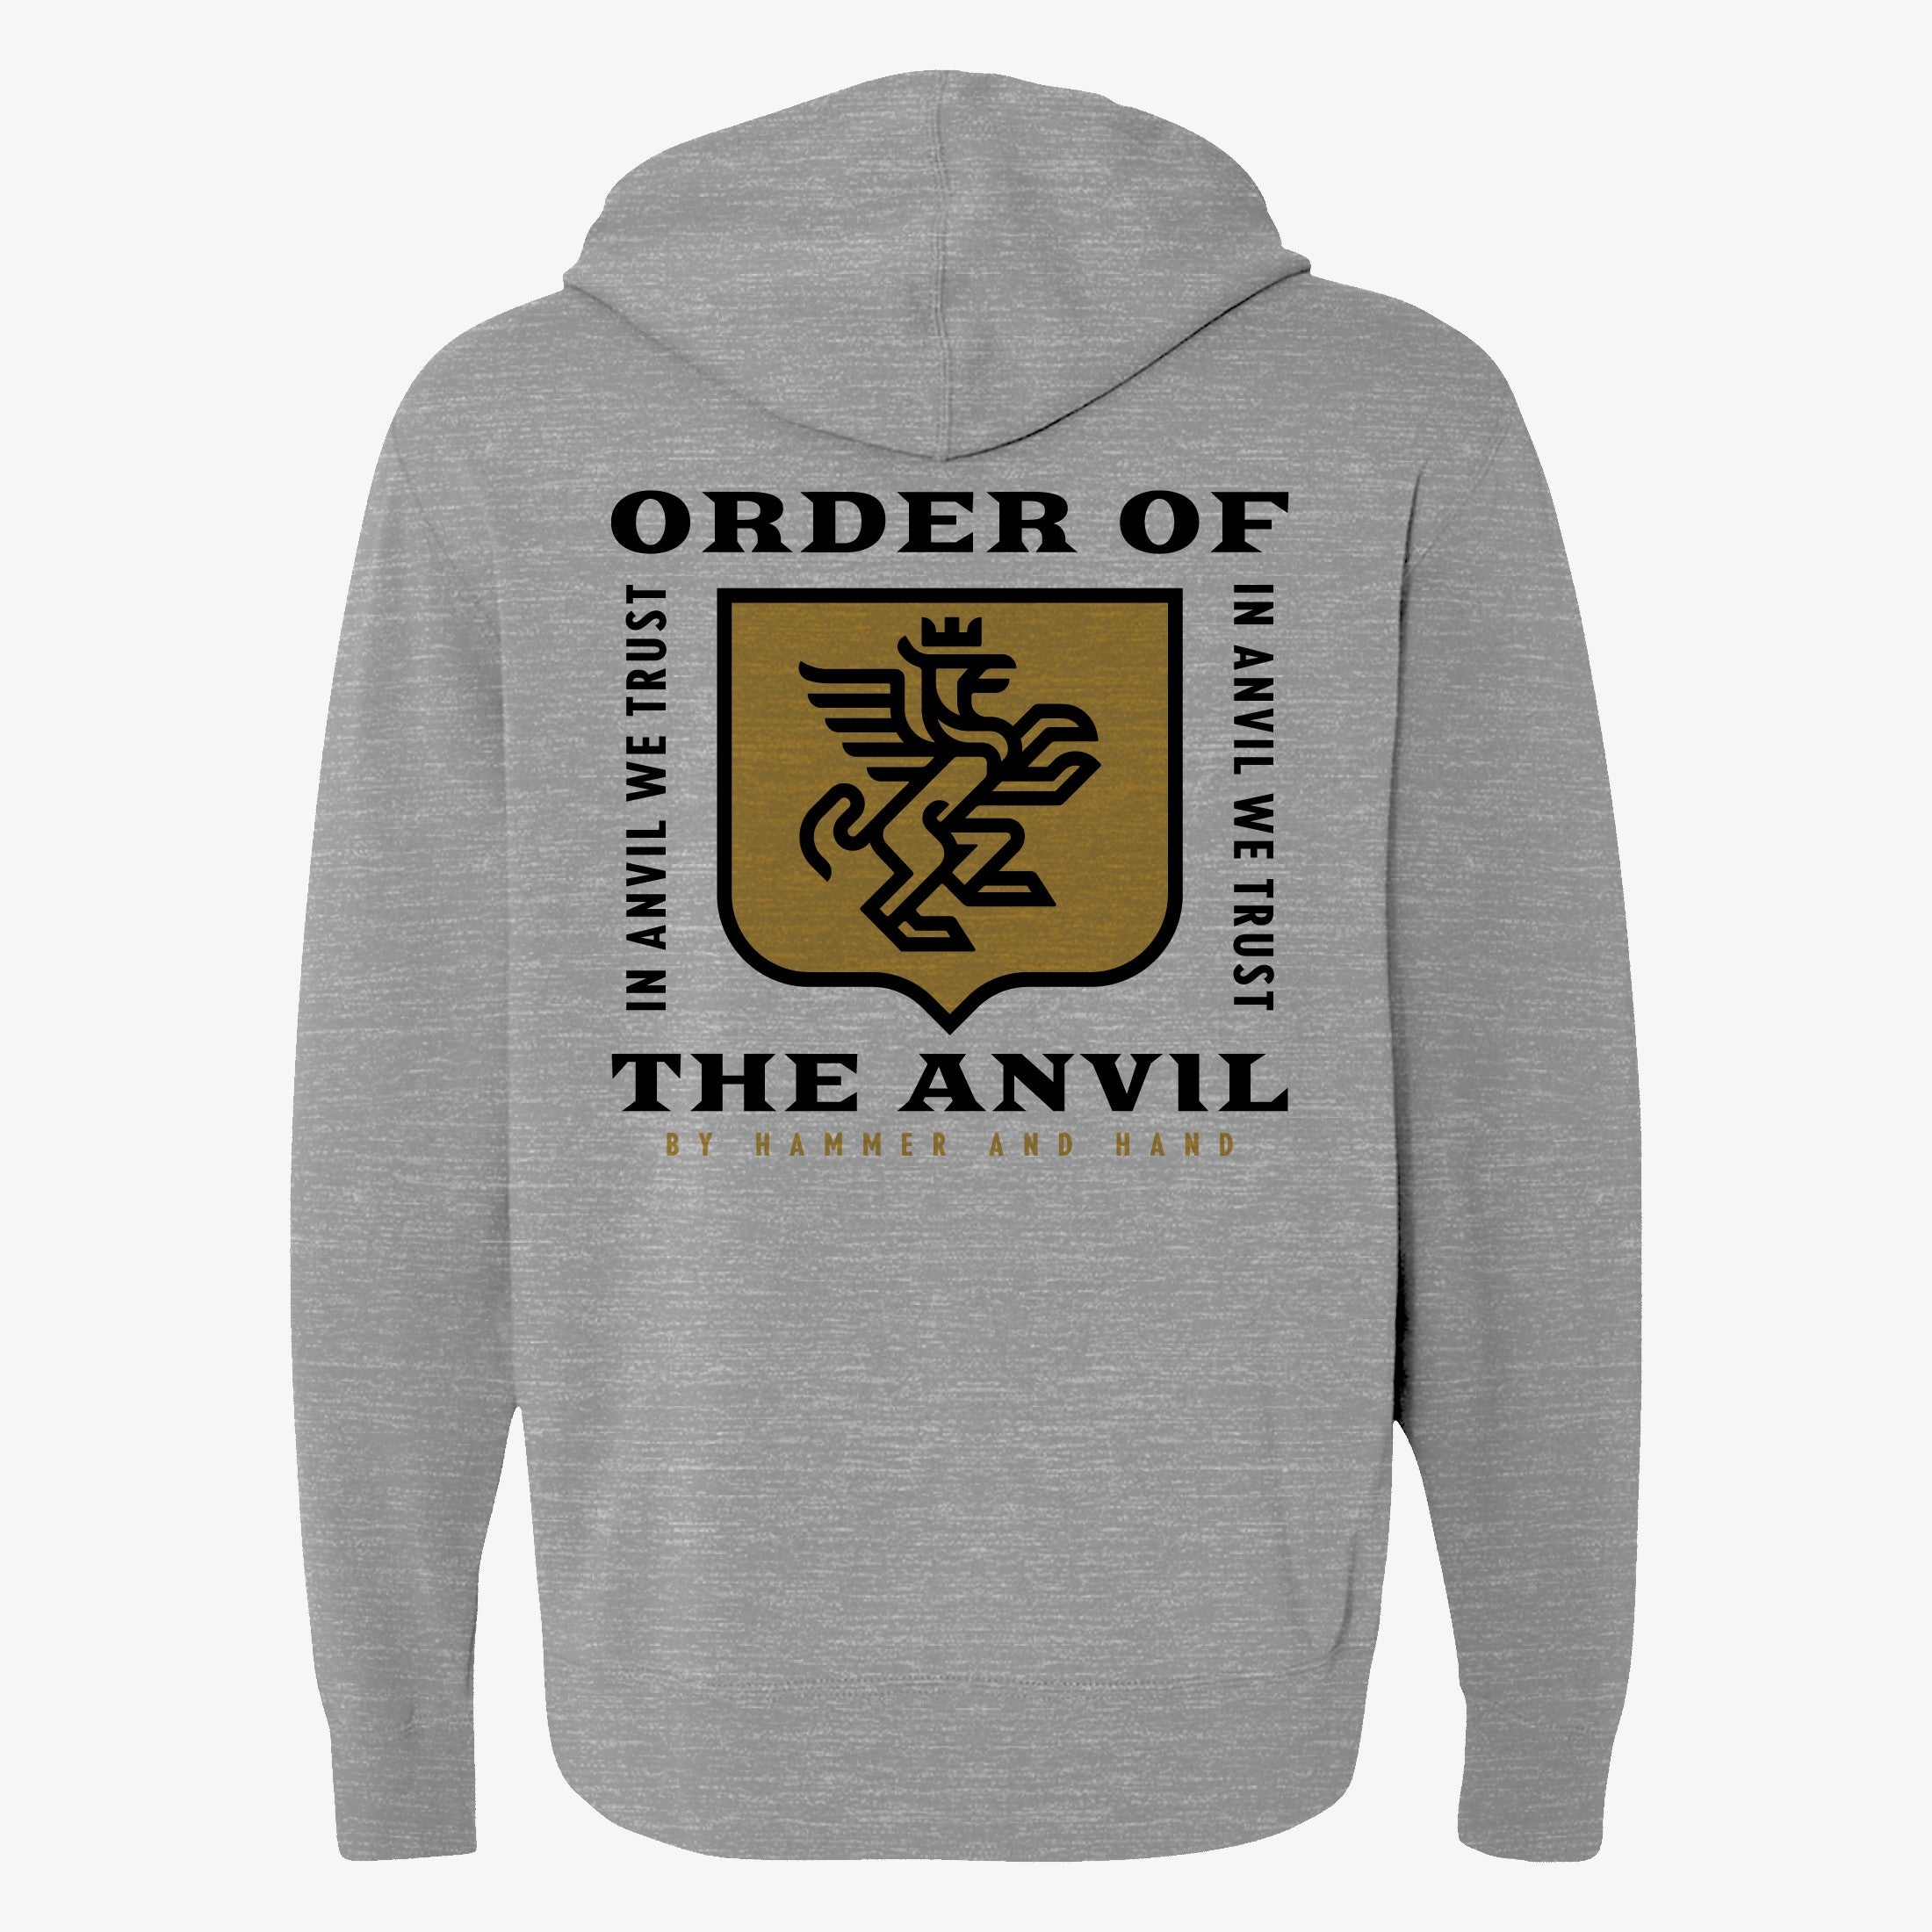 Order of the Anvil Hoodie - AleSmith Brewing Co.